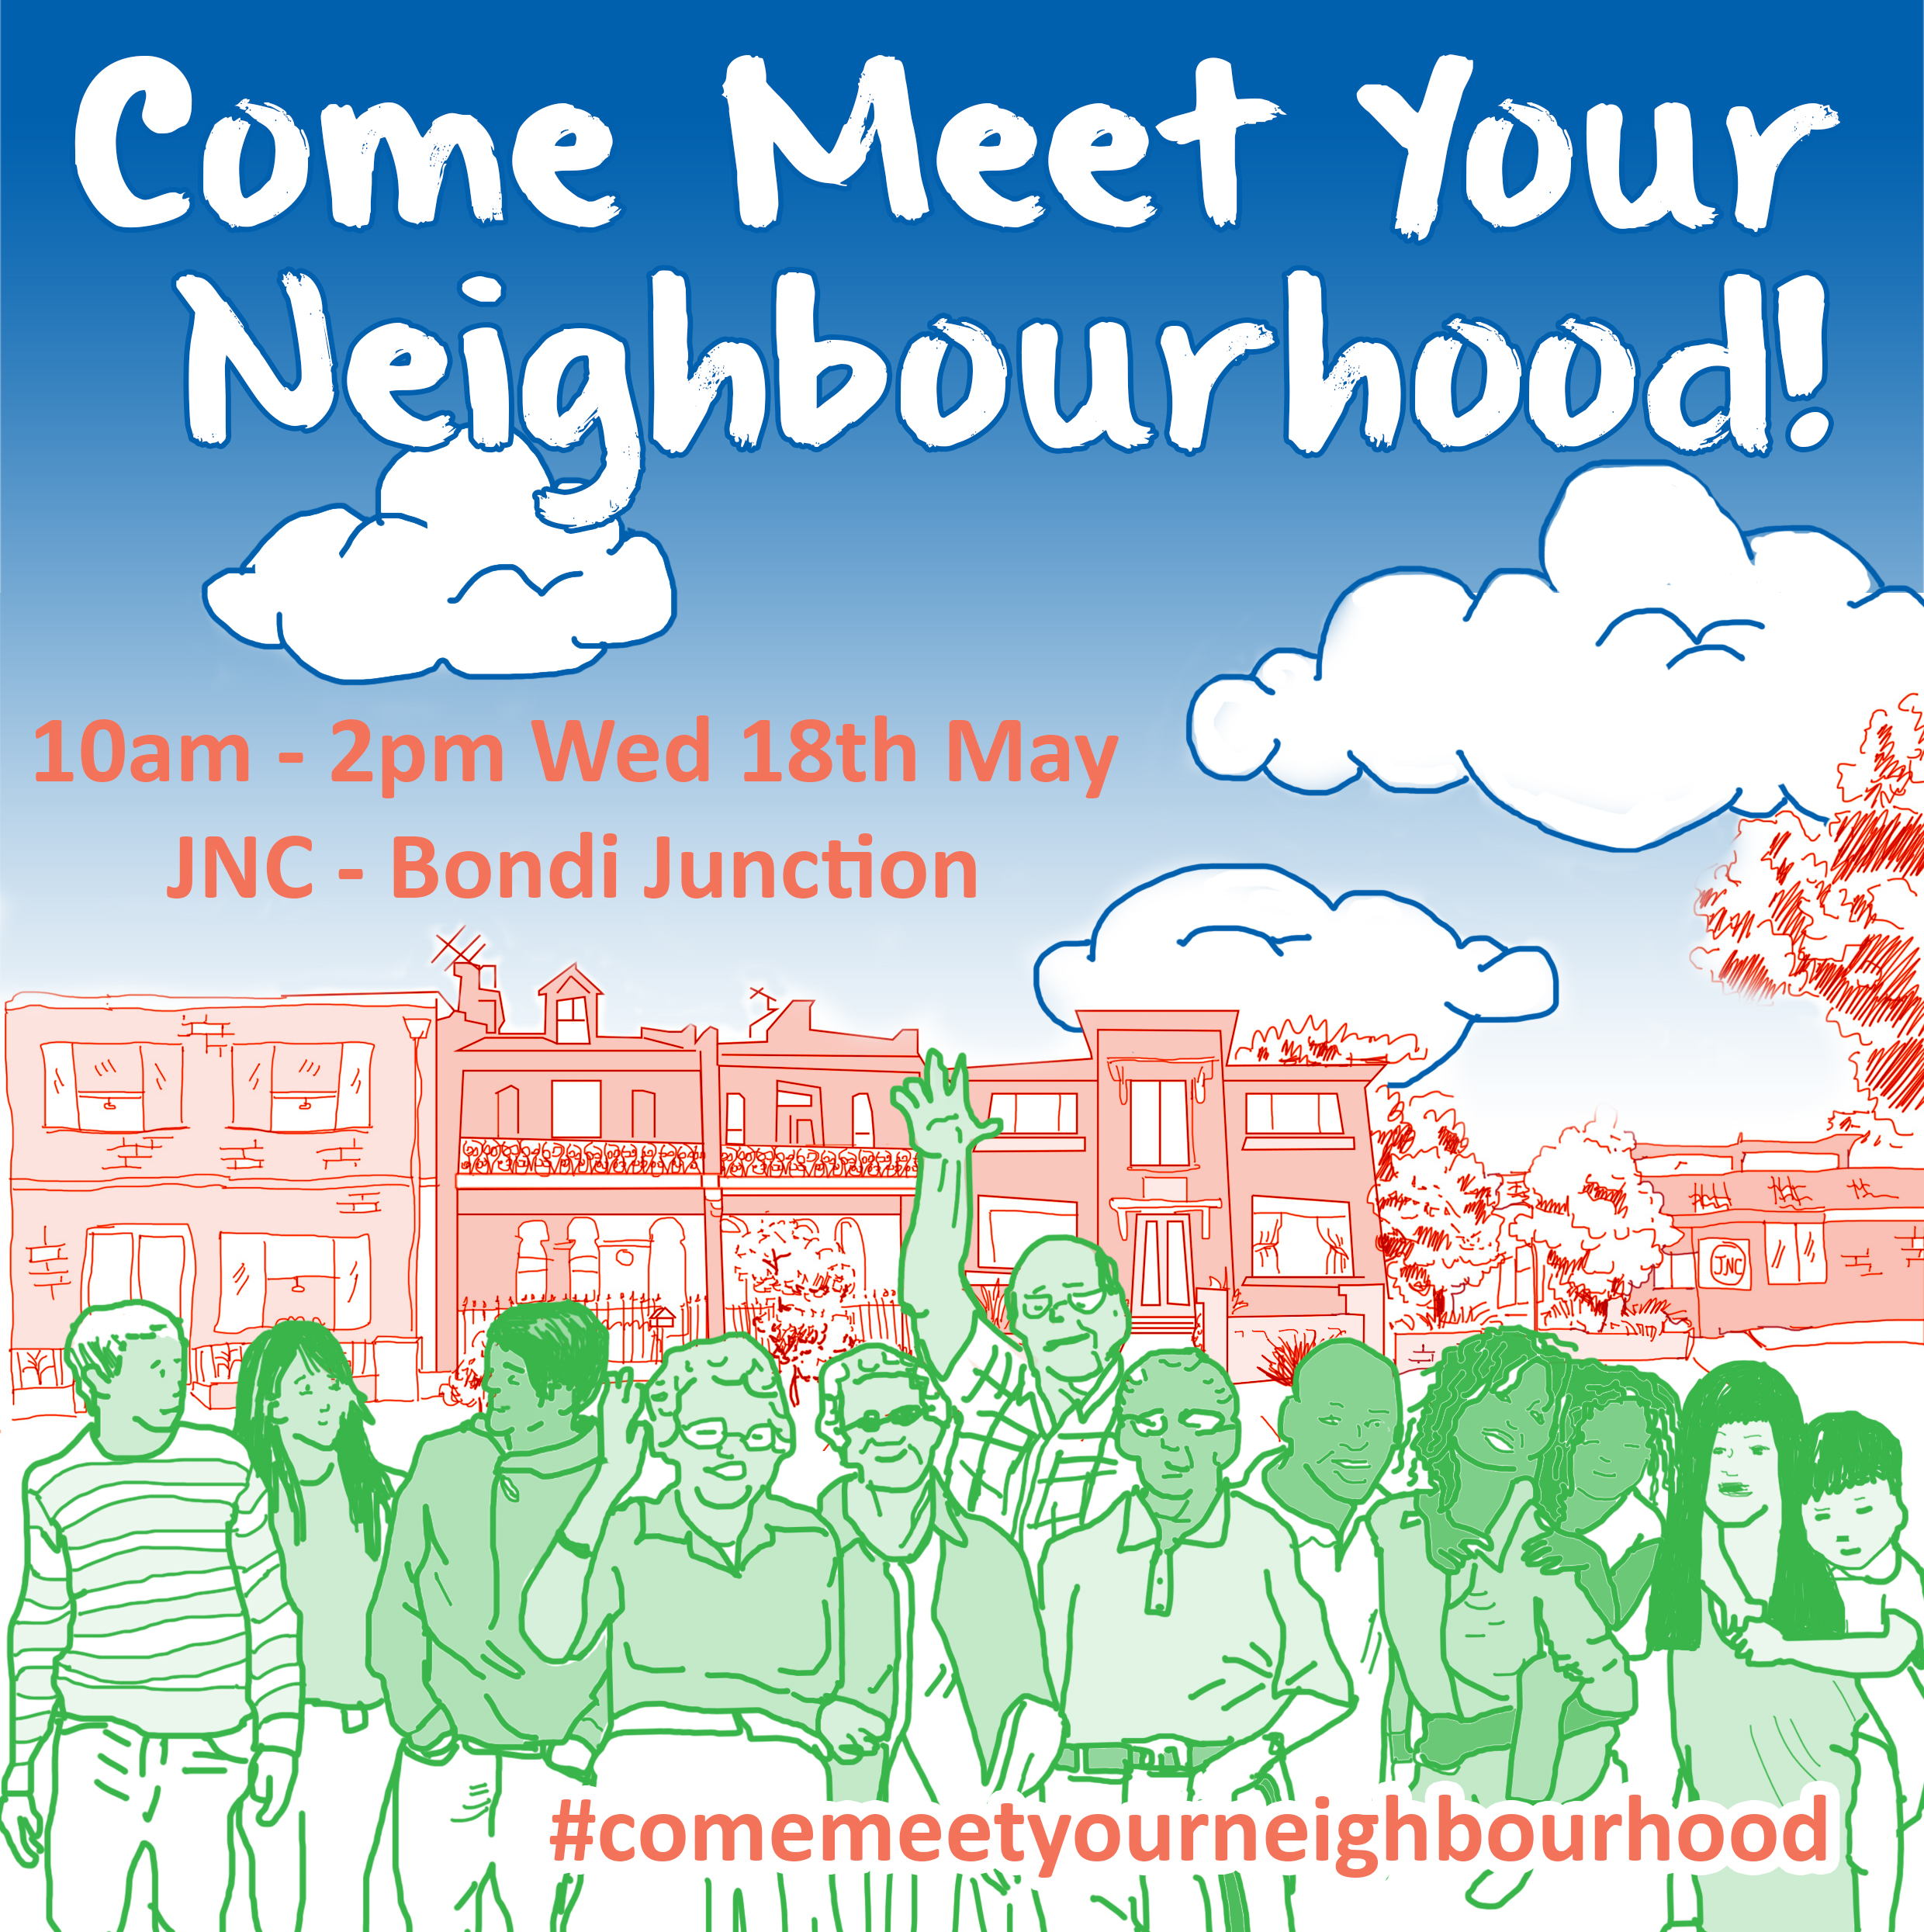 Find out what's on and how to access support in the Waverley LGA at Come Meet Your Neighbourhood.